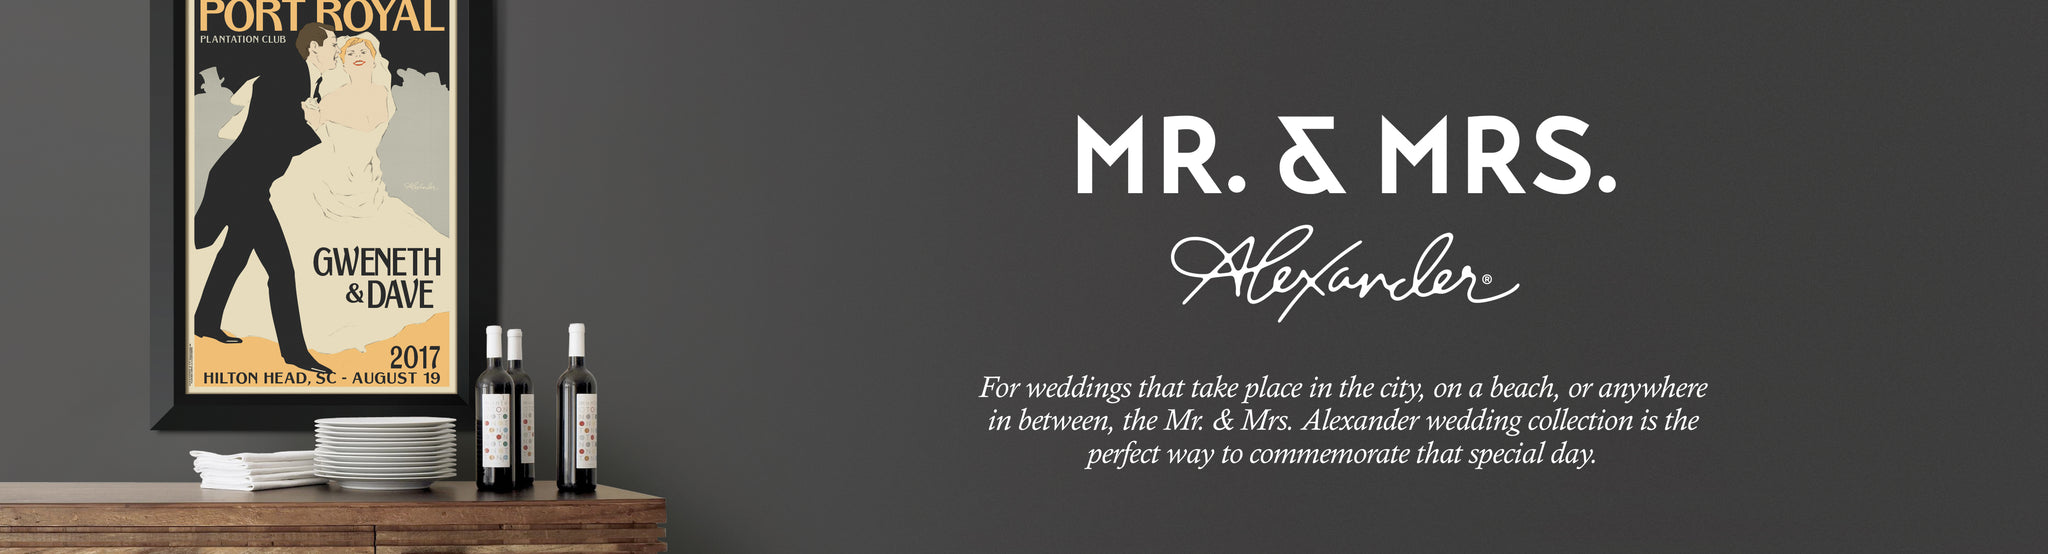 Personalized with your choice of text and color, Mr & Mrs Alexander thank you cards are the perfect way to send a heartfelt thank you to friends and family for their generosity and support of your wedding.